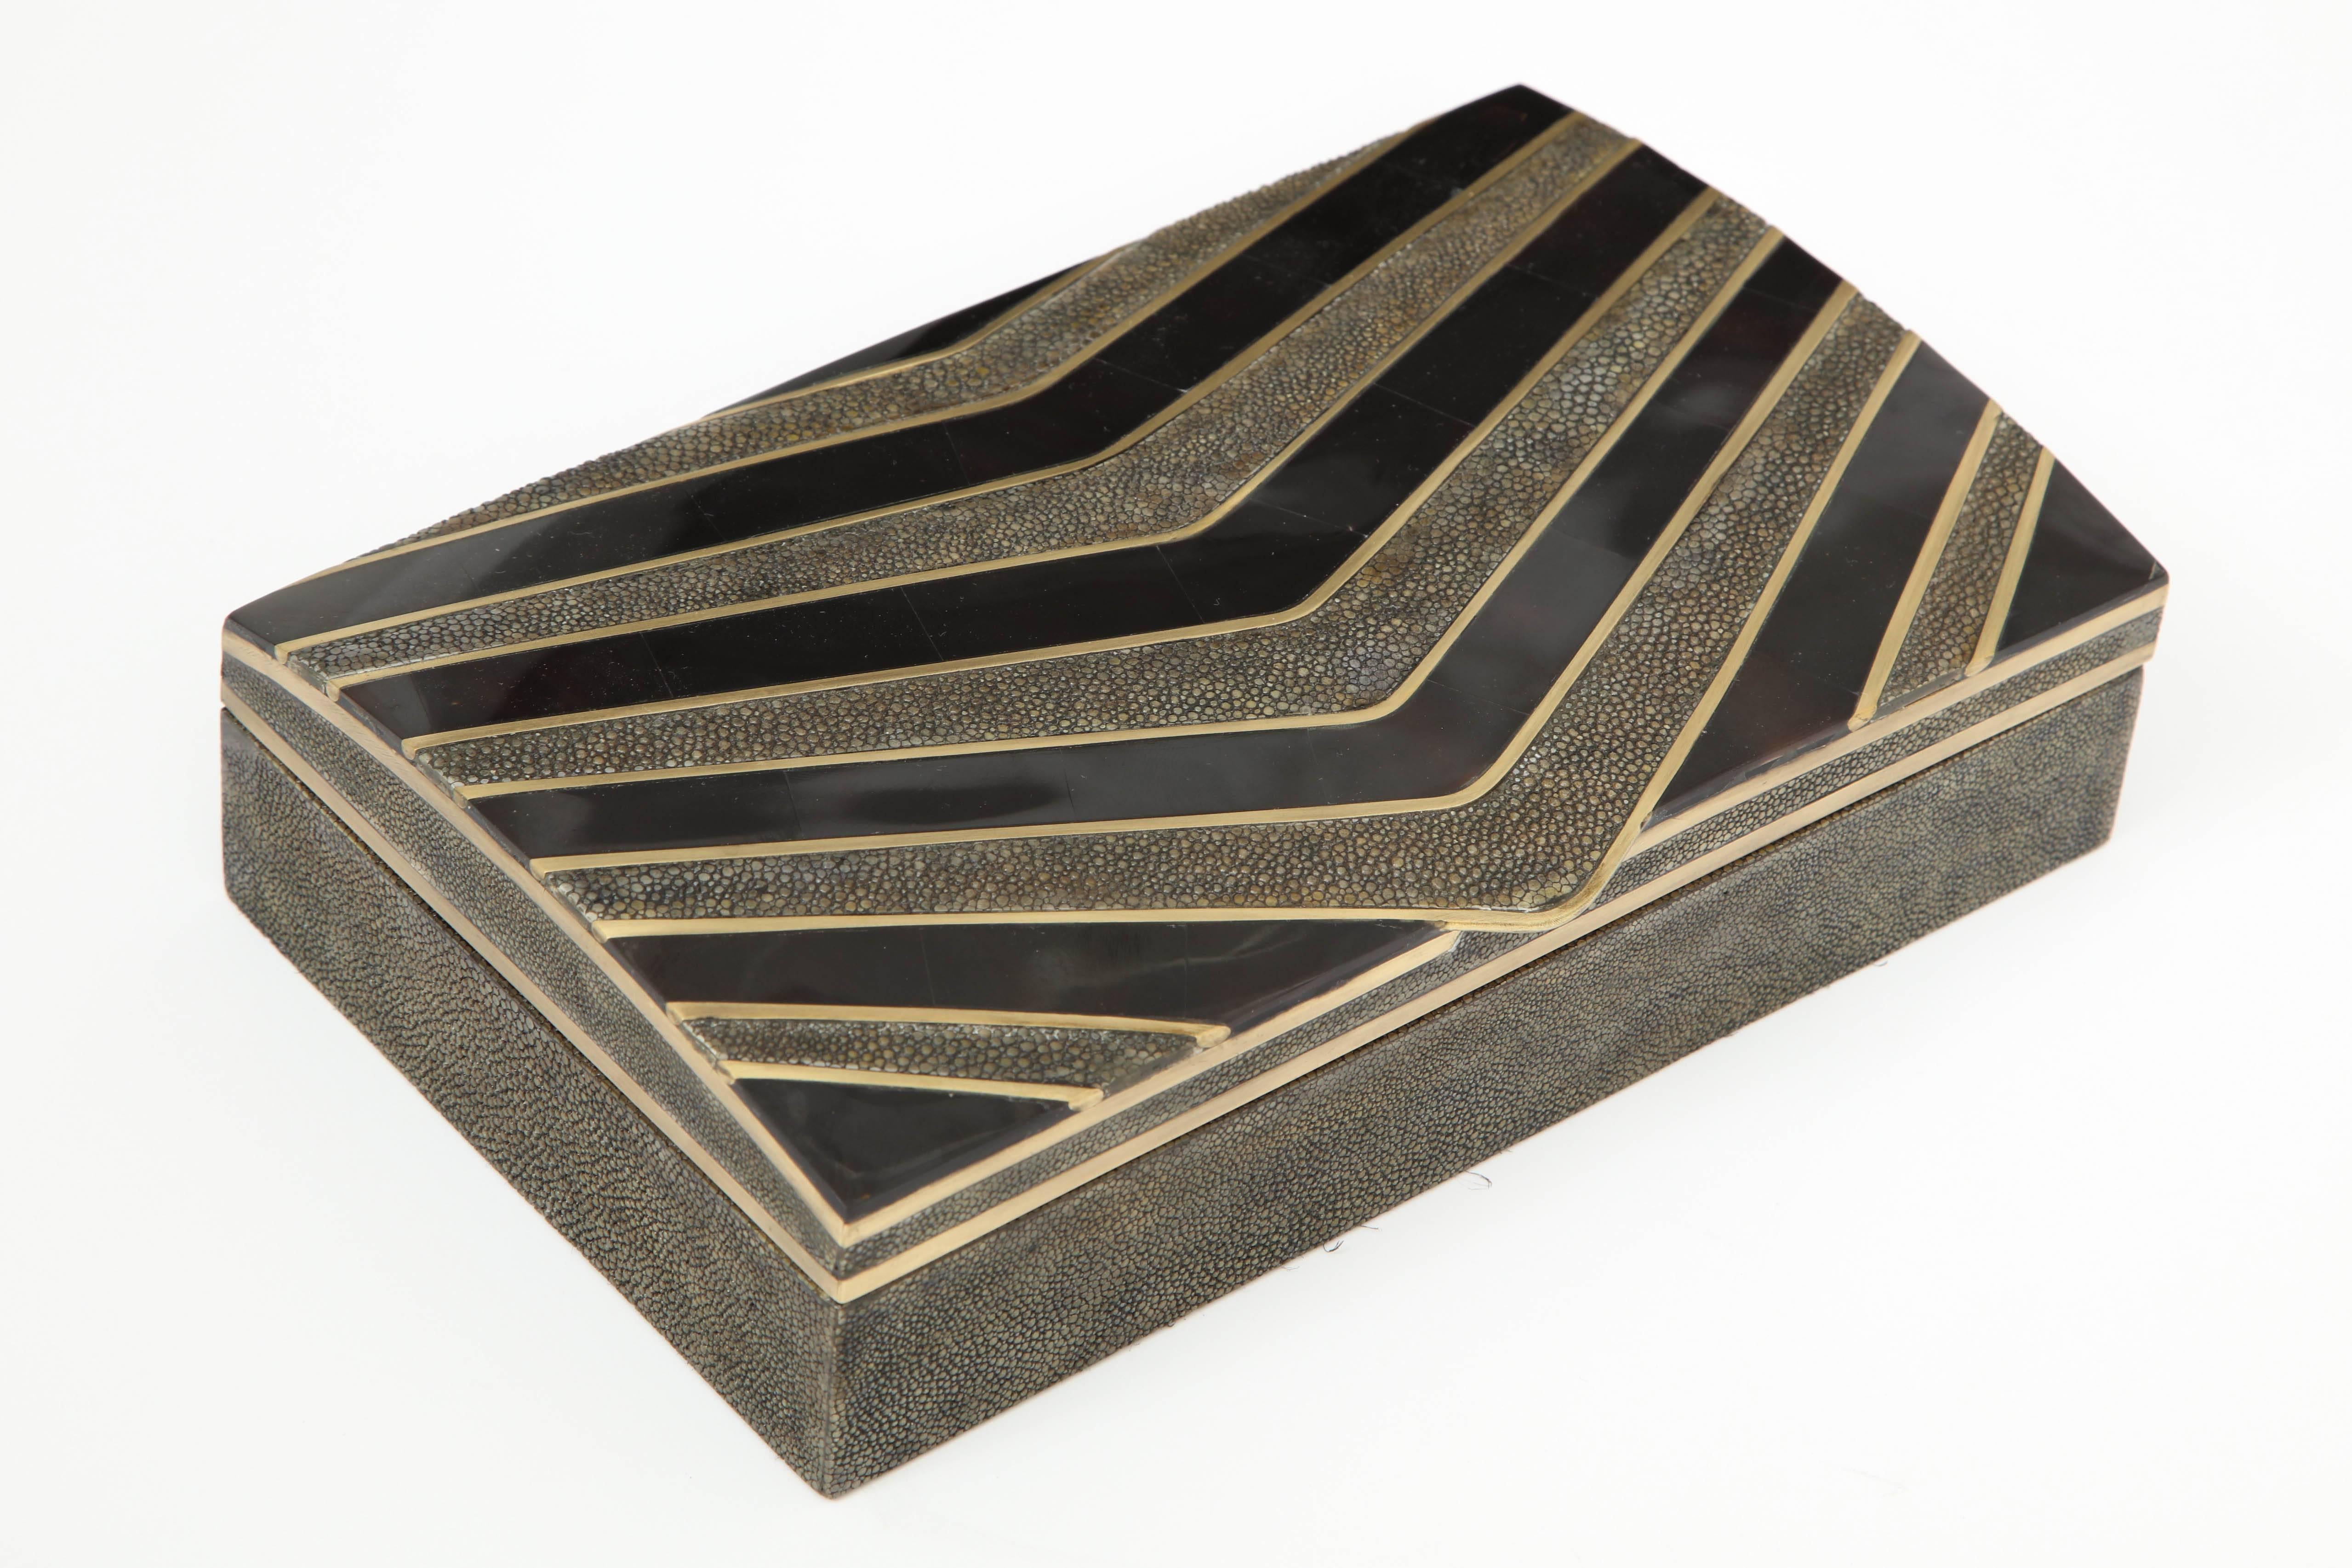 Decorative box made of shagreen, black seashell and bronze details.